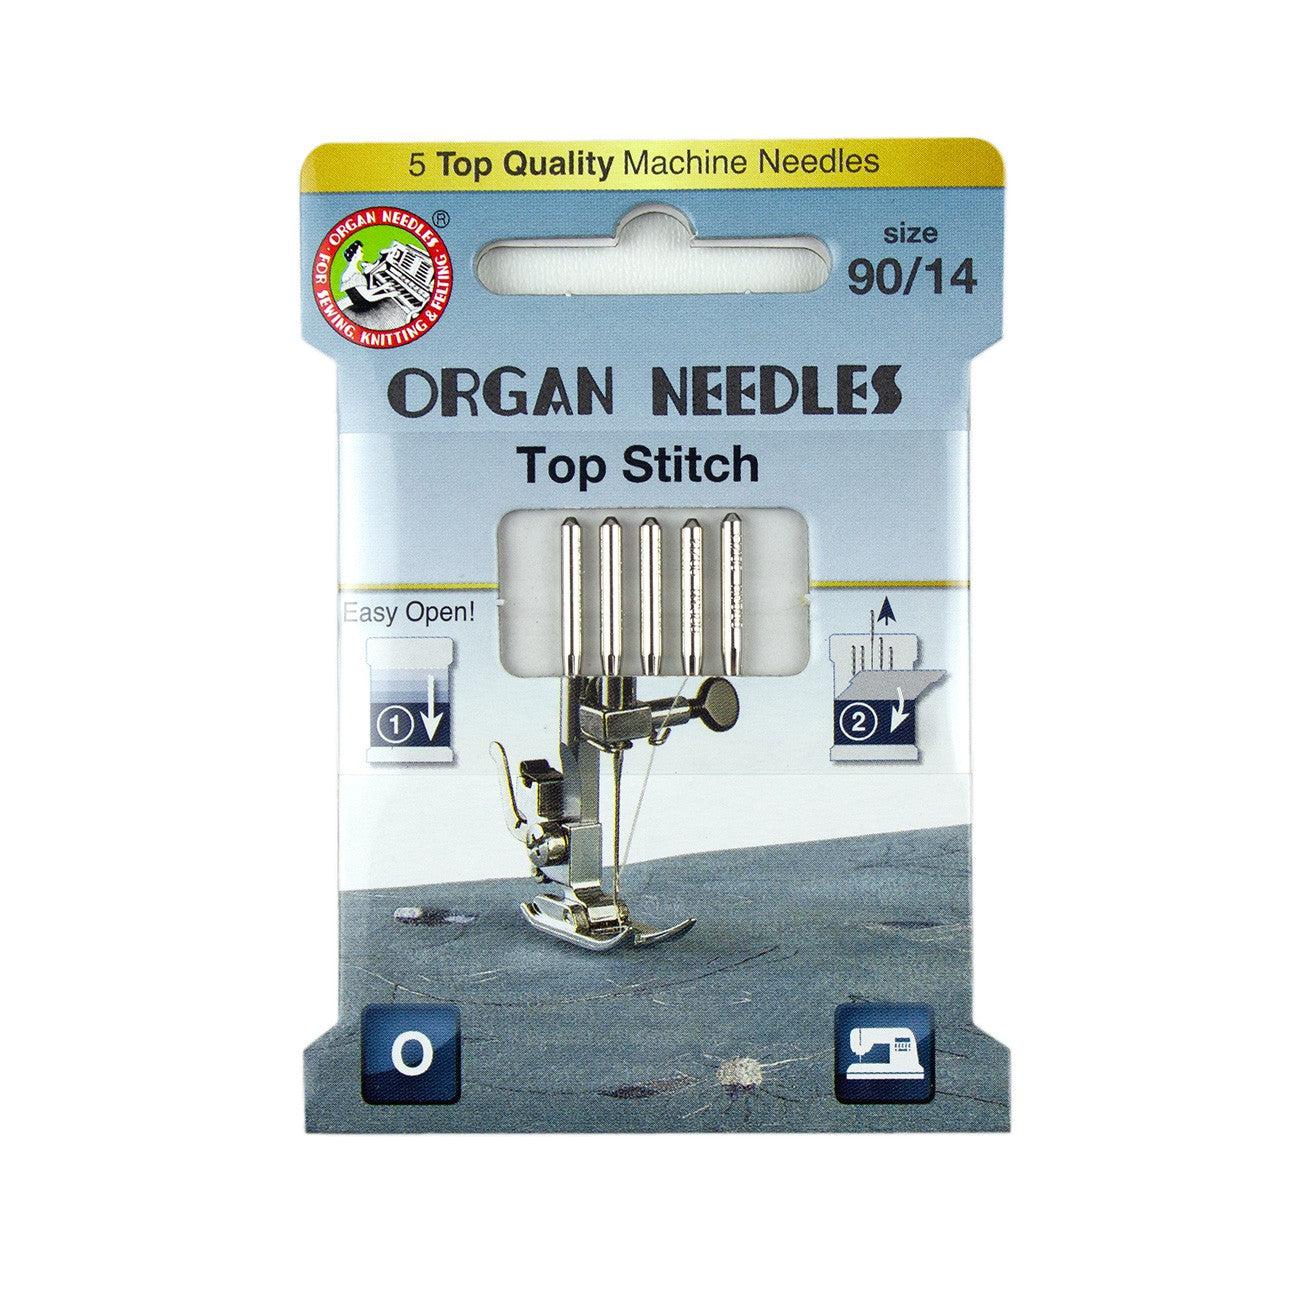 Organ Needles Top Stitch Size 90/14 Eco Pack-Organ Needles-My Favorite Quilt Store